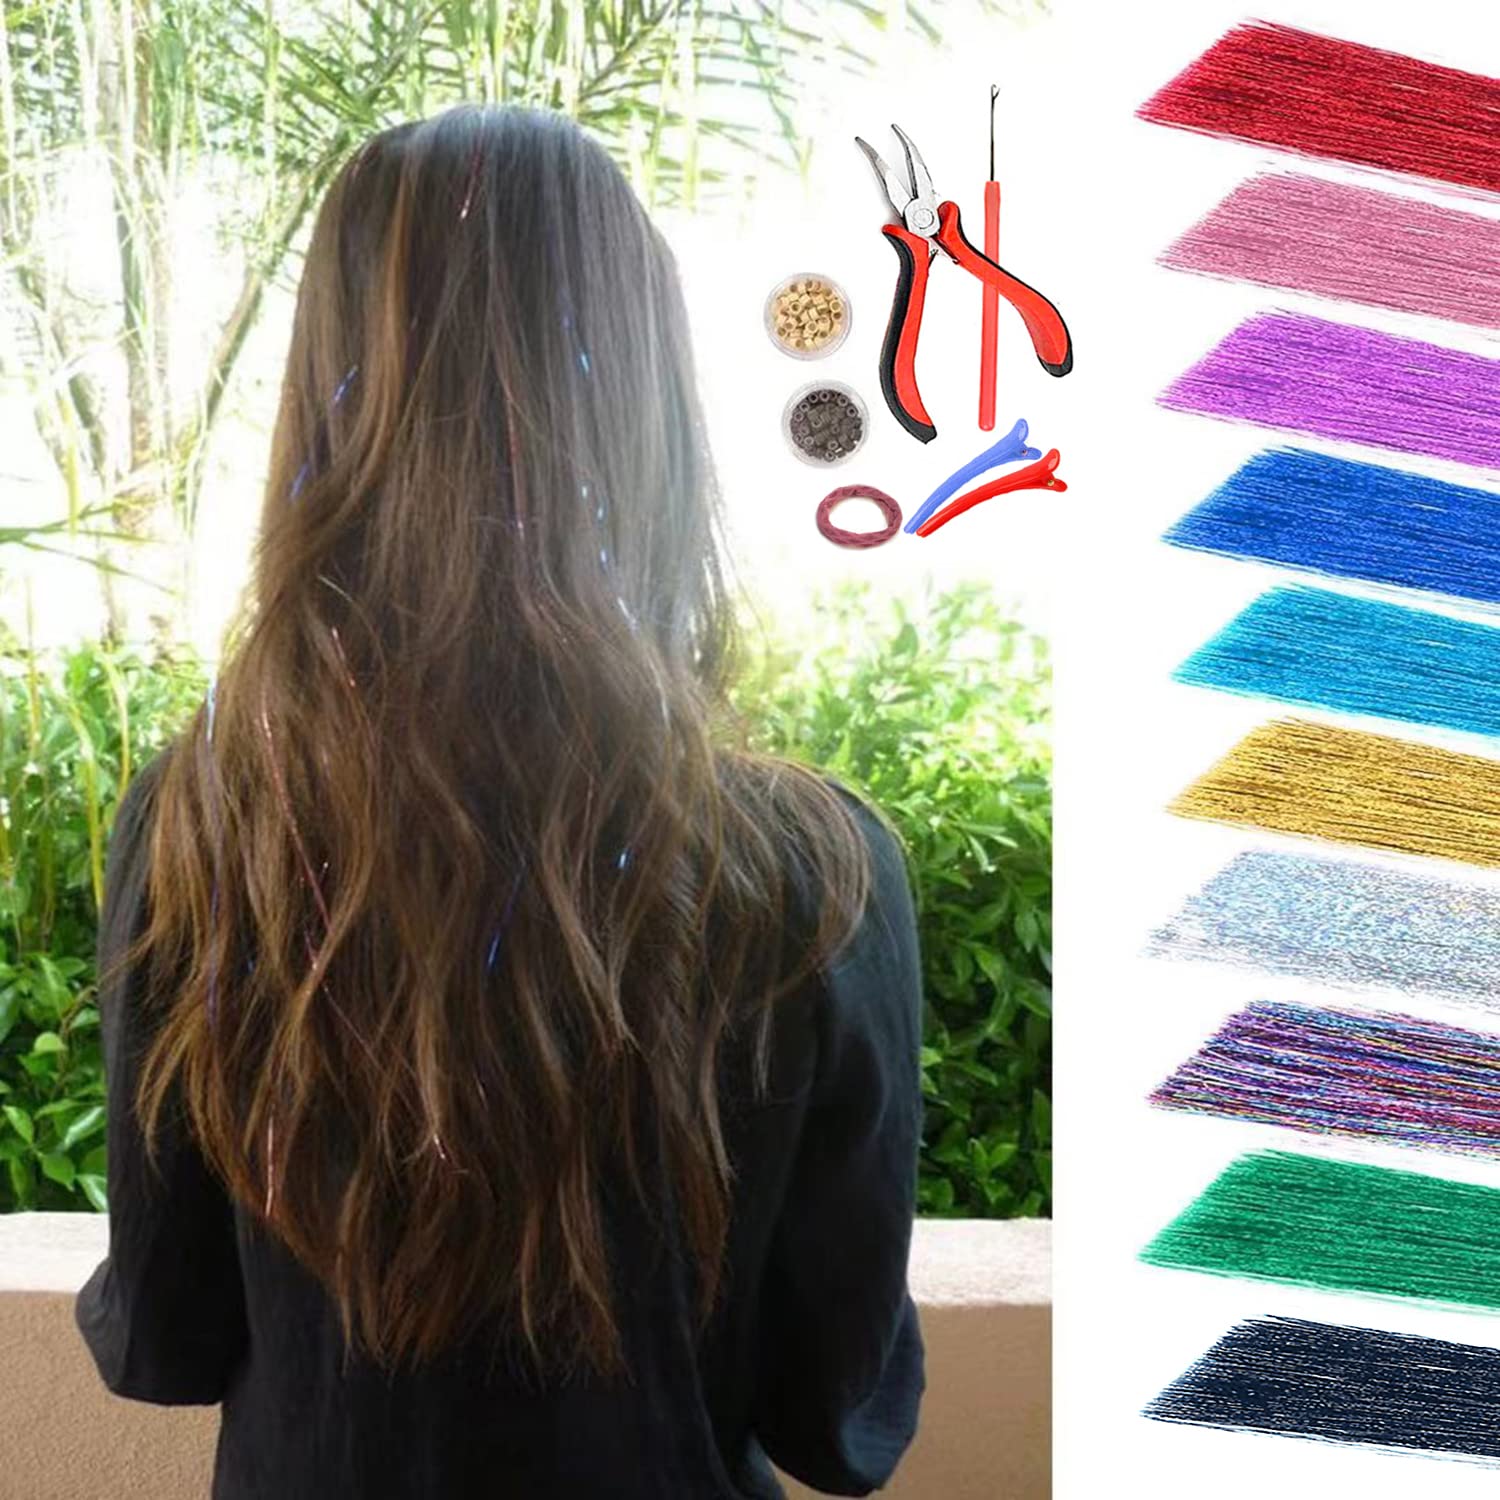 Hair Tinsel Kit, 10 Colors Tinsel Hair Extensions with Tools (a